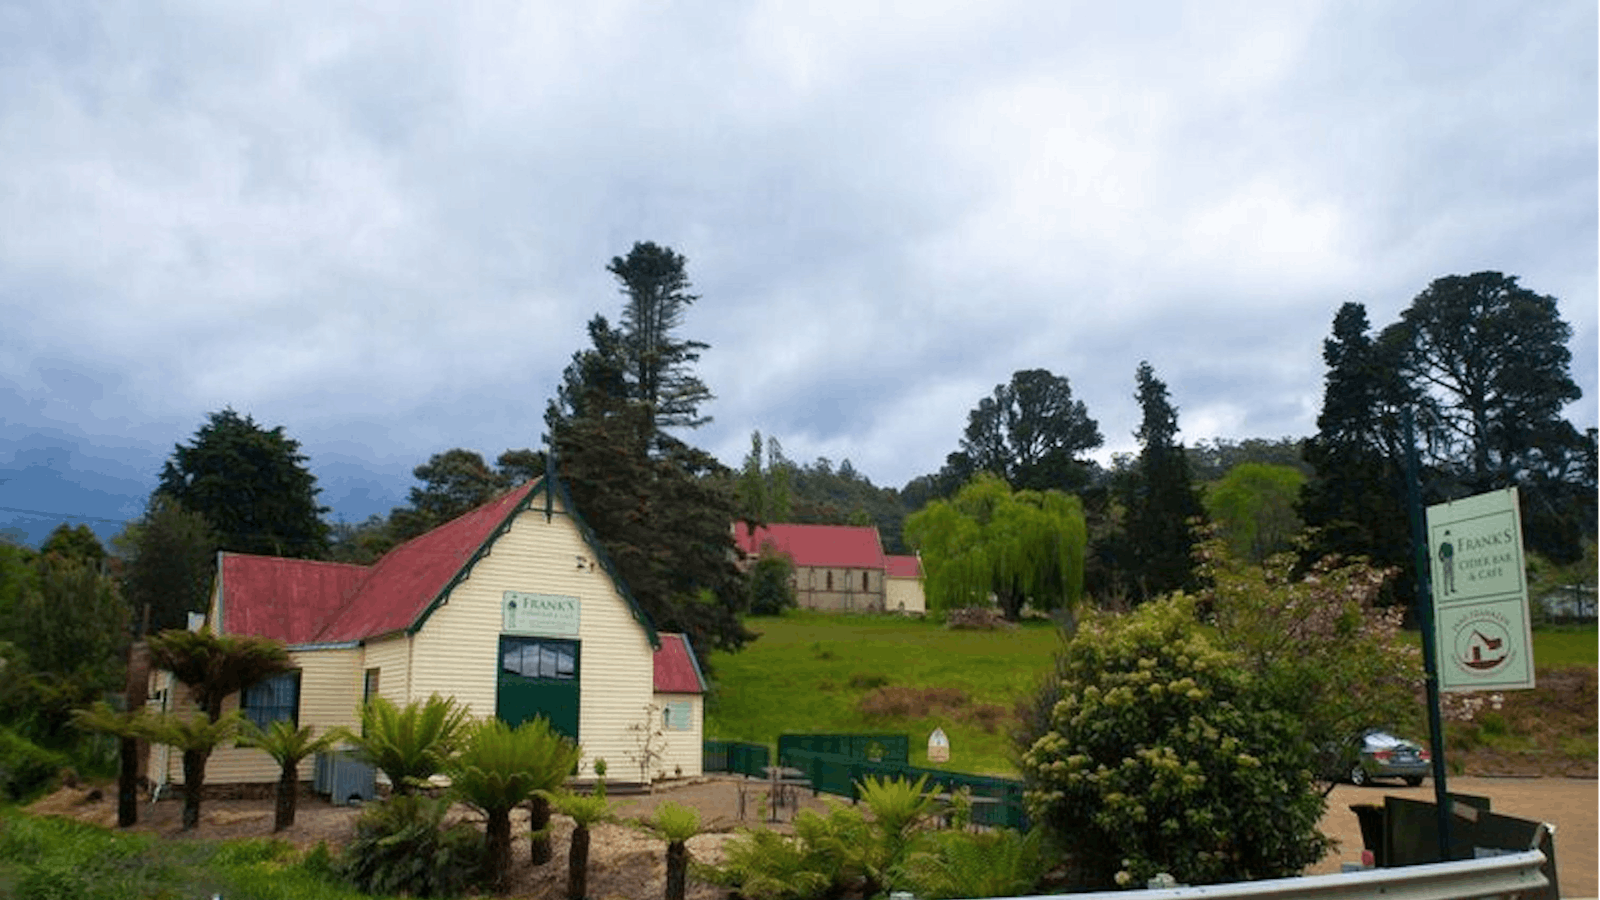 Frank's Cider Bar and Cafe - Huon Valley Heritage